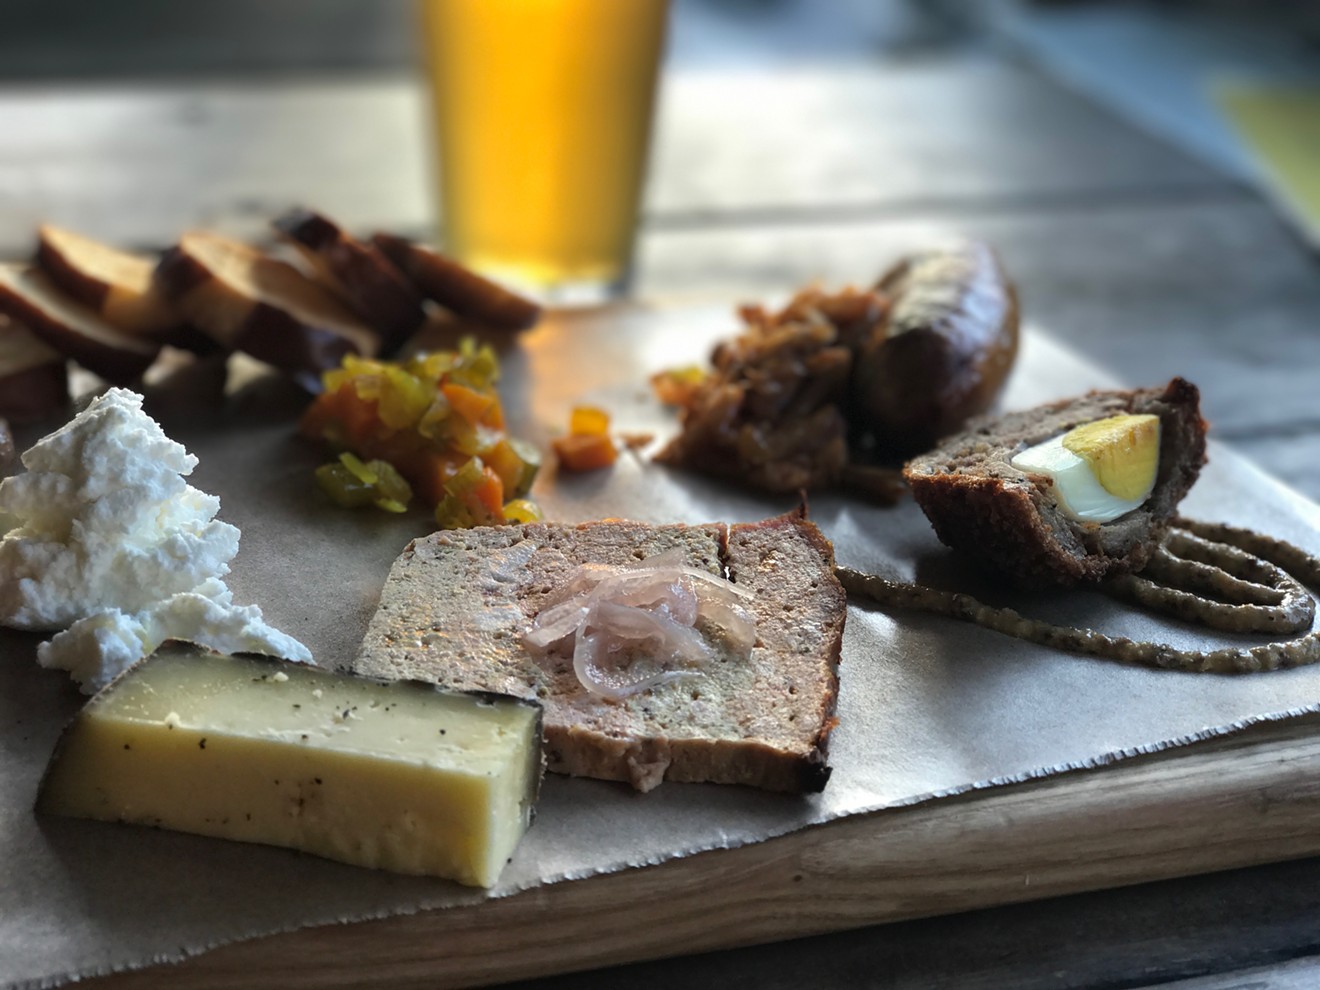 Blind Butcher's meat and cheese board ($25) is the snack of champions.